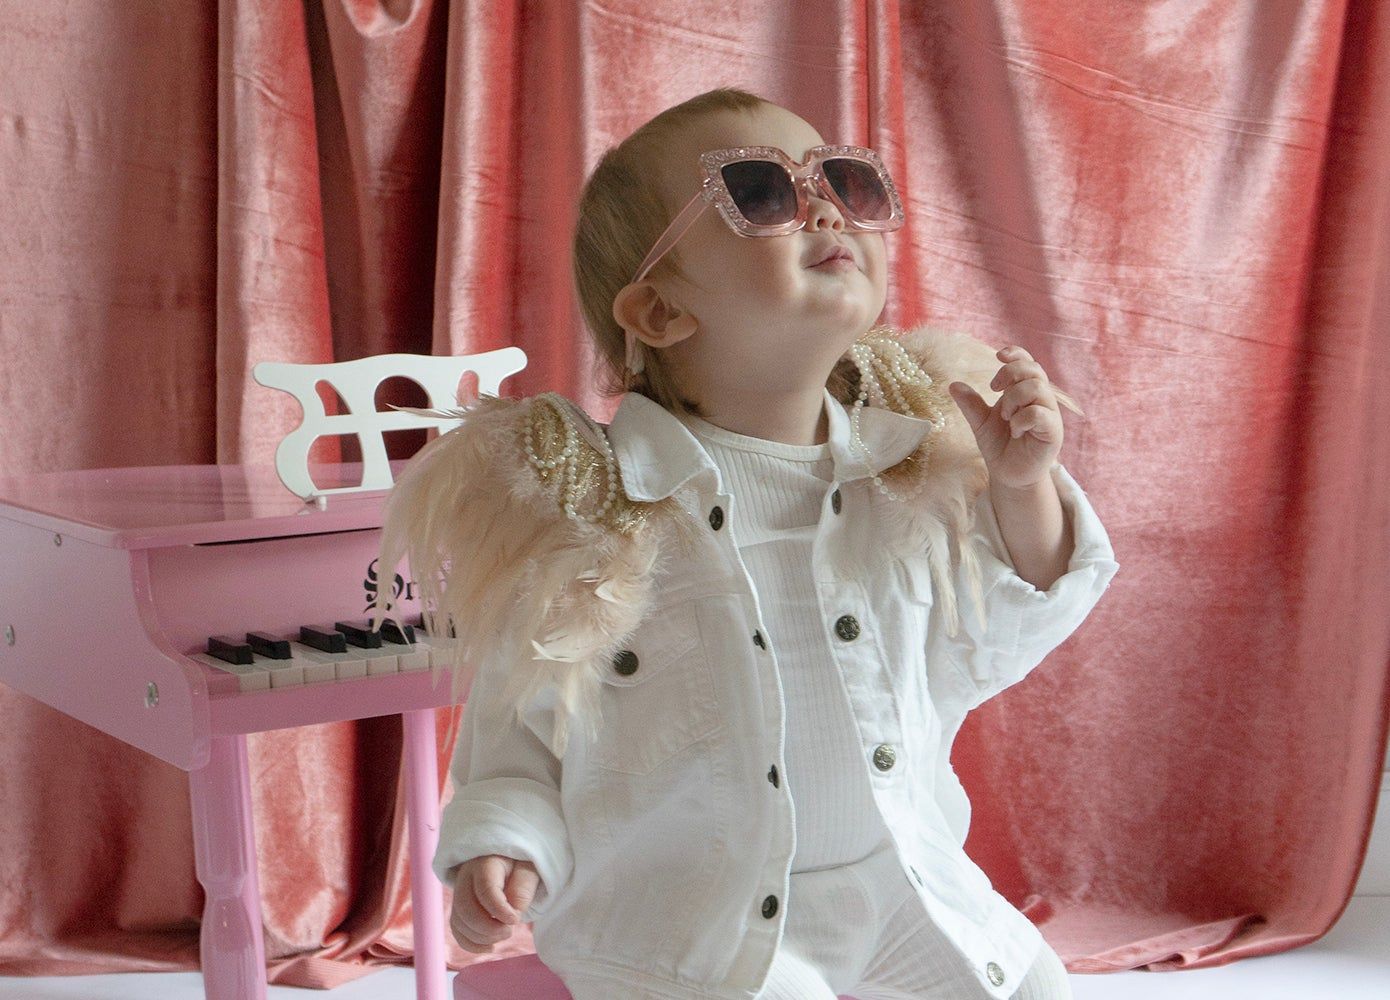 baby in glam sunglasses dressed as Elton John at a piano